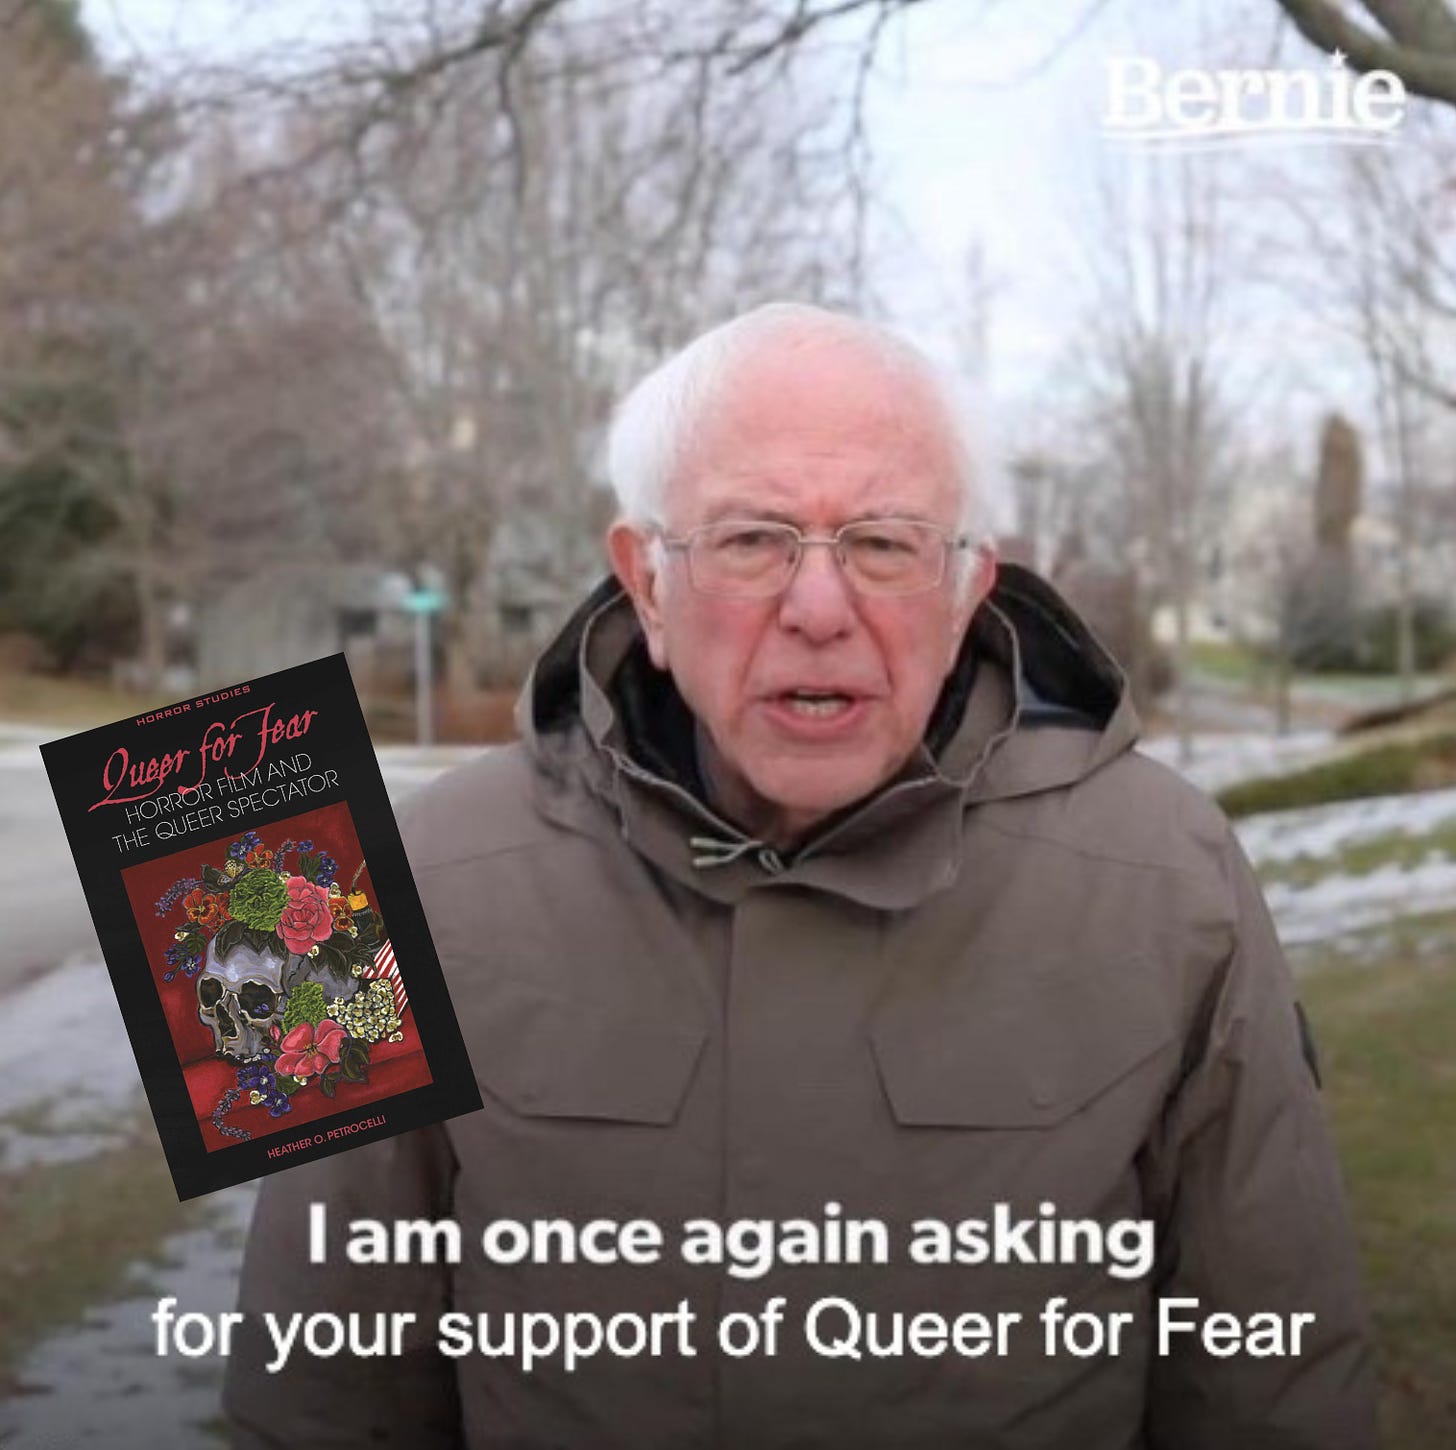 A purposefully silly version of the Bernie Sanders meme, which shows the old white man standing on a snowy street talking with the caption below him that reads: "I am once again asking for your support of Queer for Fear" with the book cover of Queer for Fear pasted to his left.